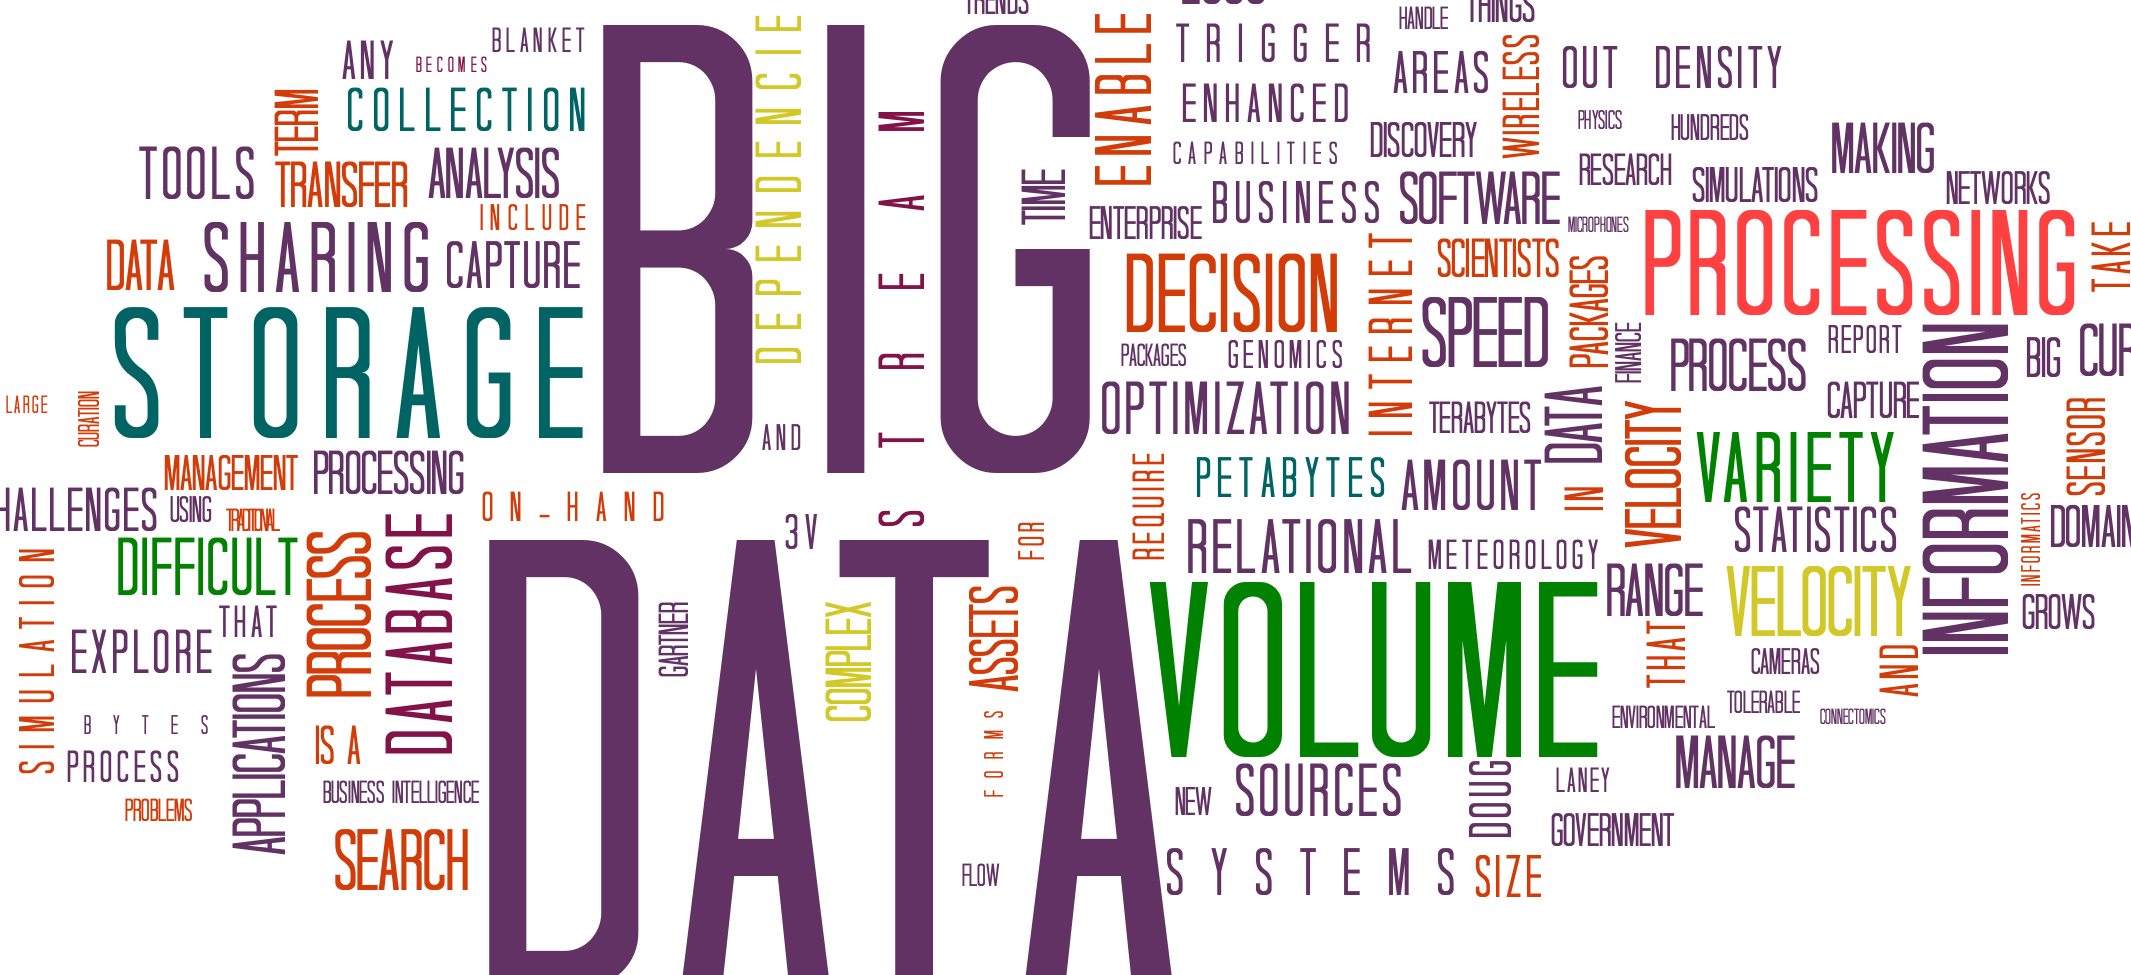 Figuring out how to apply "Big Data" is a top priority for many digital signage executives.